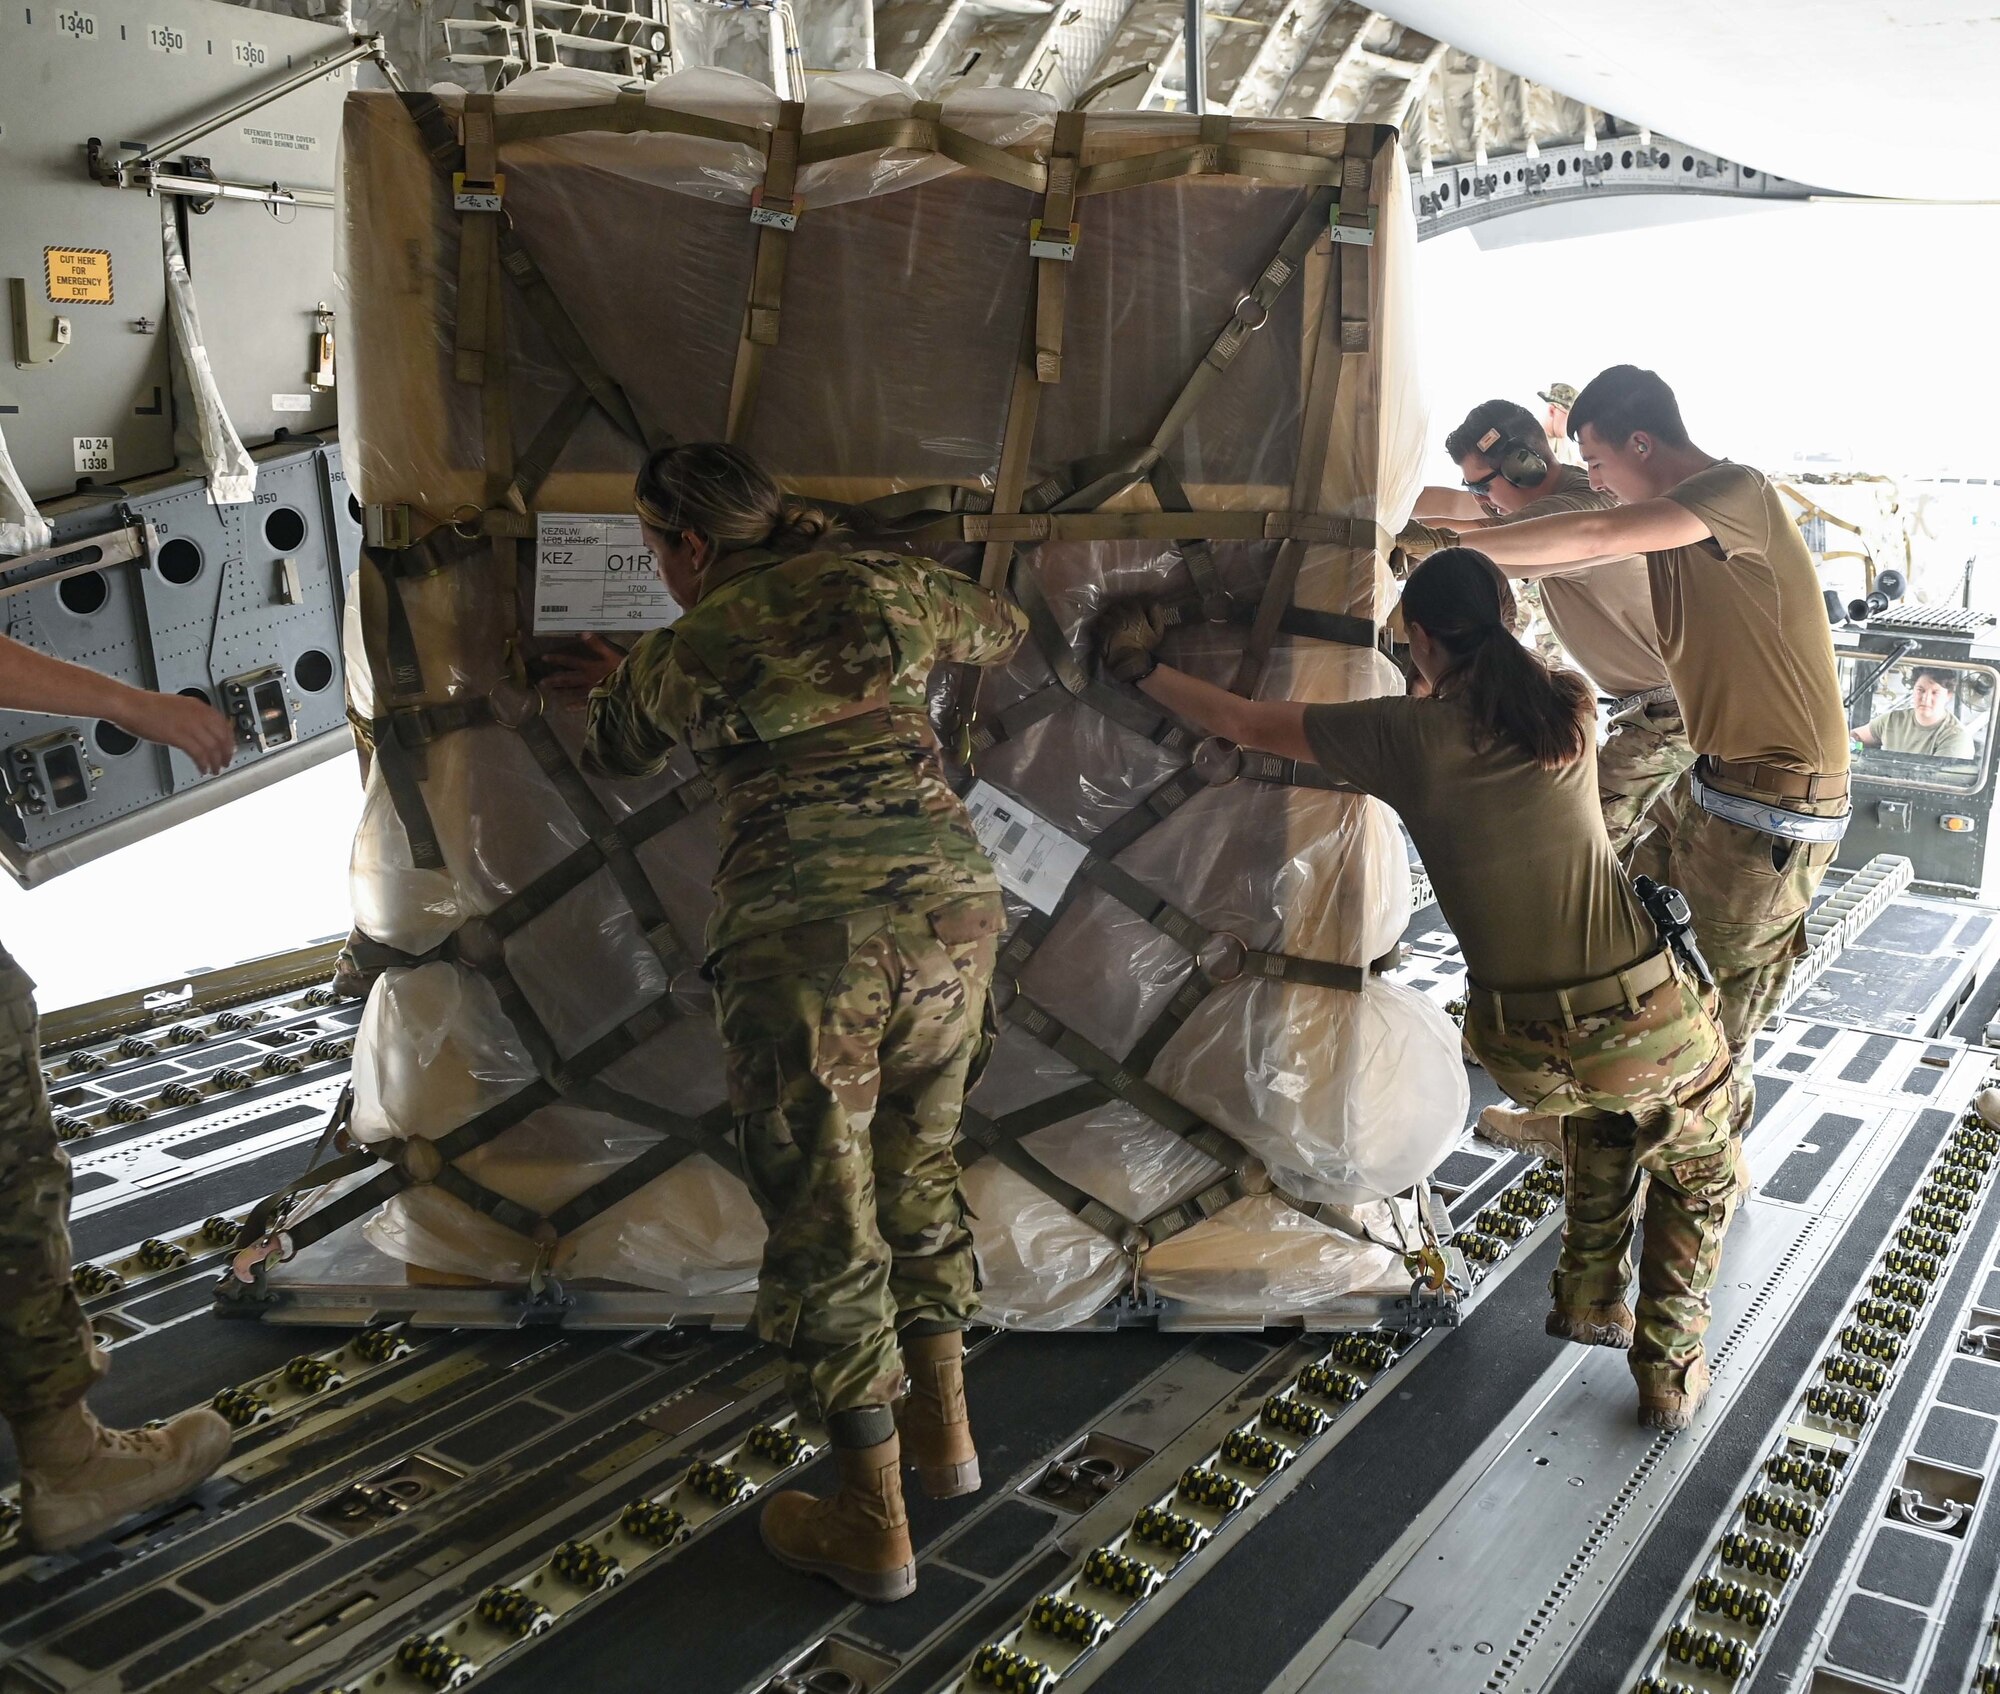 Airmen from the 386th Expeditionary Logistics Readiness Squadron along with l816th Expeditionary Airlift Squadron loadmasters position cargo aboard a C-17 Globemaster aircraft July 12, 2022 at Ali Al Salem Air Base, Kuwait. The C-17, assigned to Al Udeid Airbase, Qatar, transported the cargo to other bases in the region. (U.S. Air National Guard photo by Tech. Sgt. Michael J. Kelly)